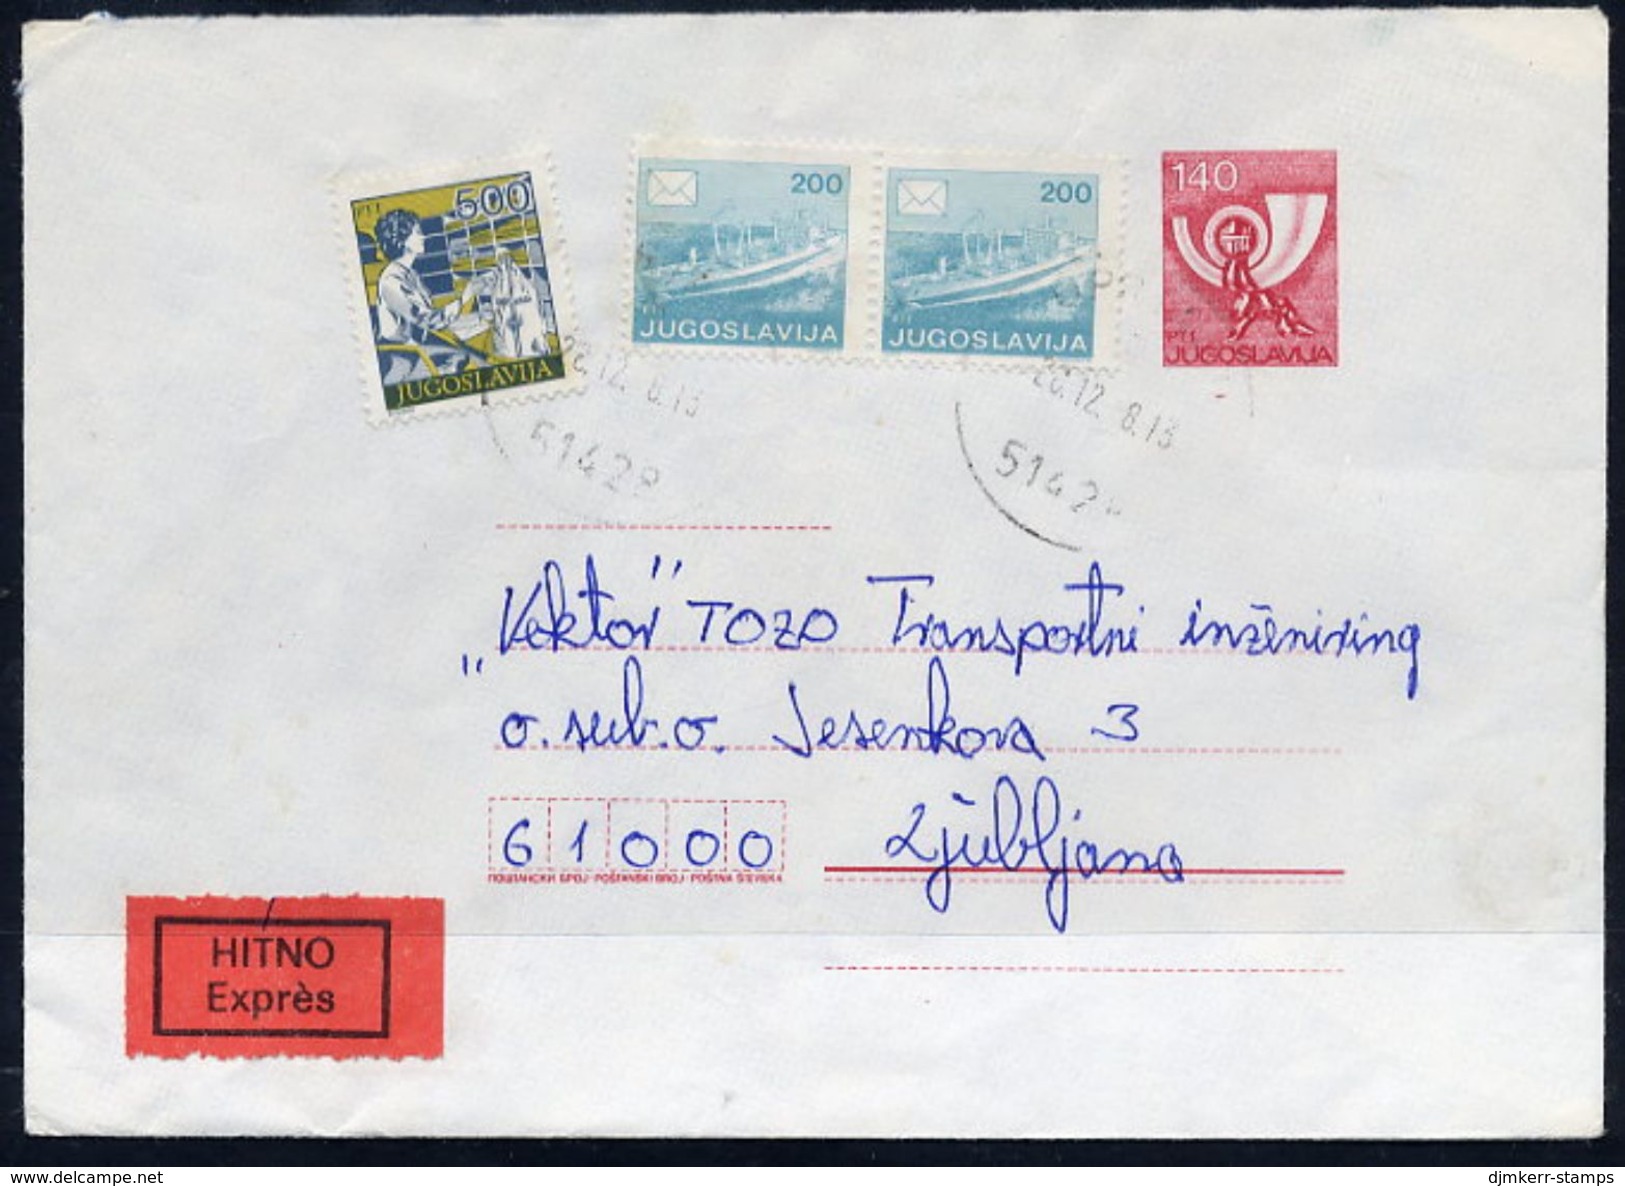 YUGOSLAVIA 1988 Posthorn 140 D.stationery Envelope  Used With Additional Franking And Express Label.  Michel U81 - Ganzsachen